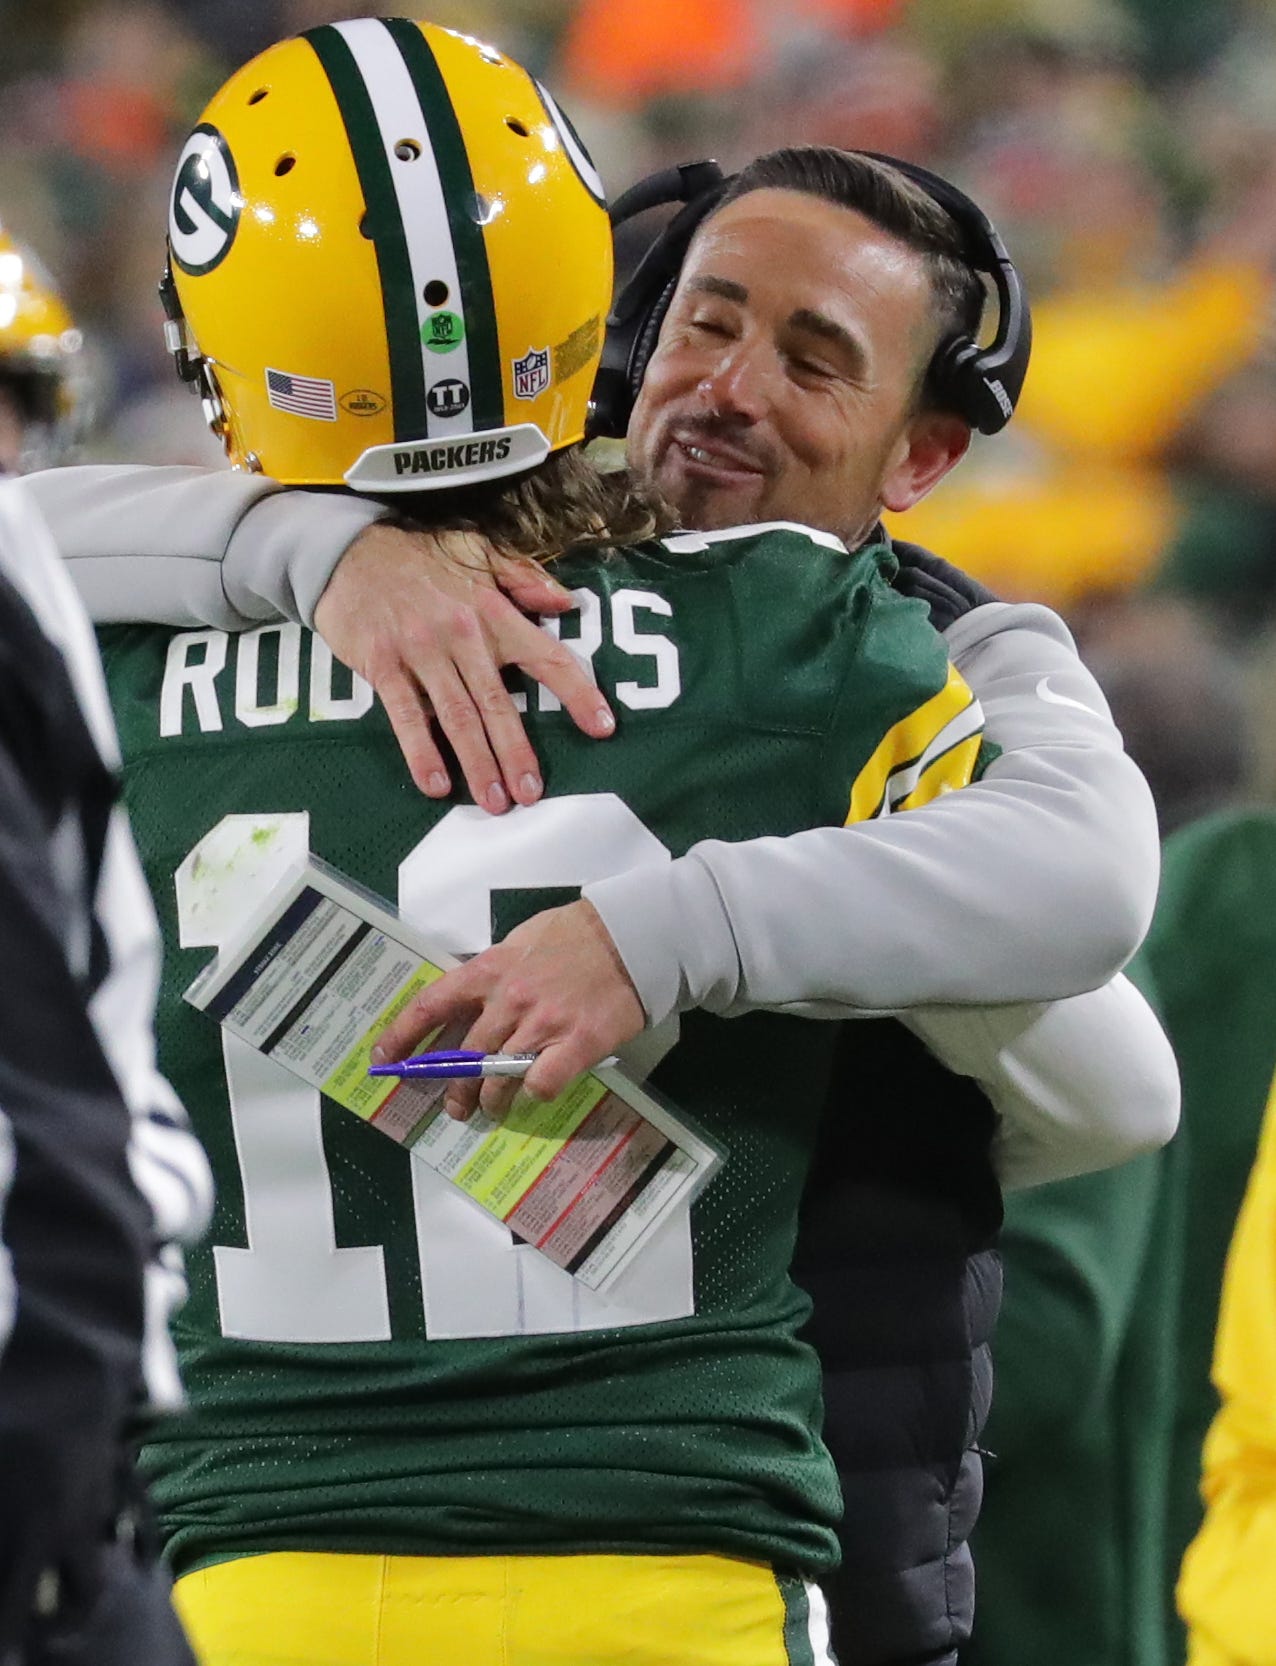 Green Bay Packers head coach Matt LaFleuer hugs quarterback Aaron Rodgers (12) after he threw a touchdown pass during the fourth quarter of their game Sunday, December 12, 2021 at Lambeau Field in Green Bay, Wis. The Green Bay Packers beat the Chicago Bears 45-30.